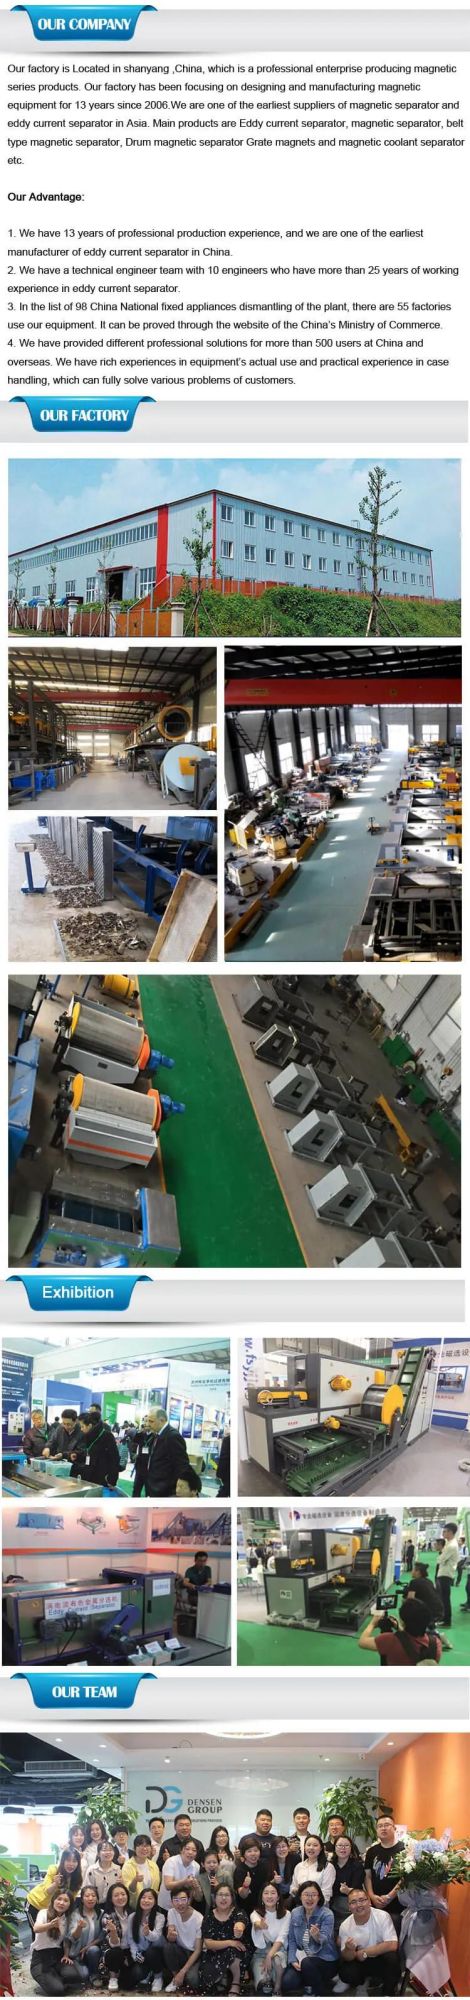 Electromagnetic Lifter Manufacturer in China, Automatic Lifting Magnets, Electromagnet